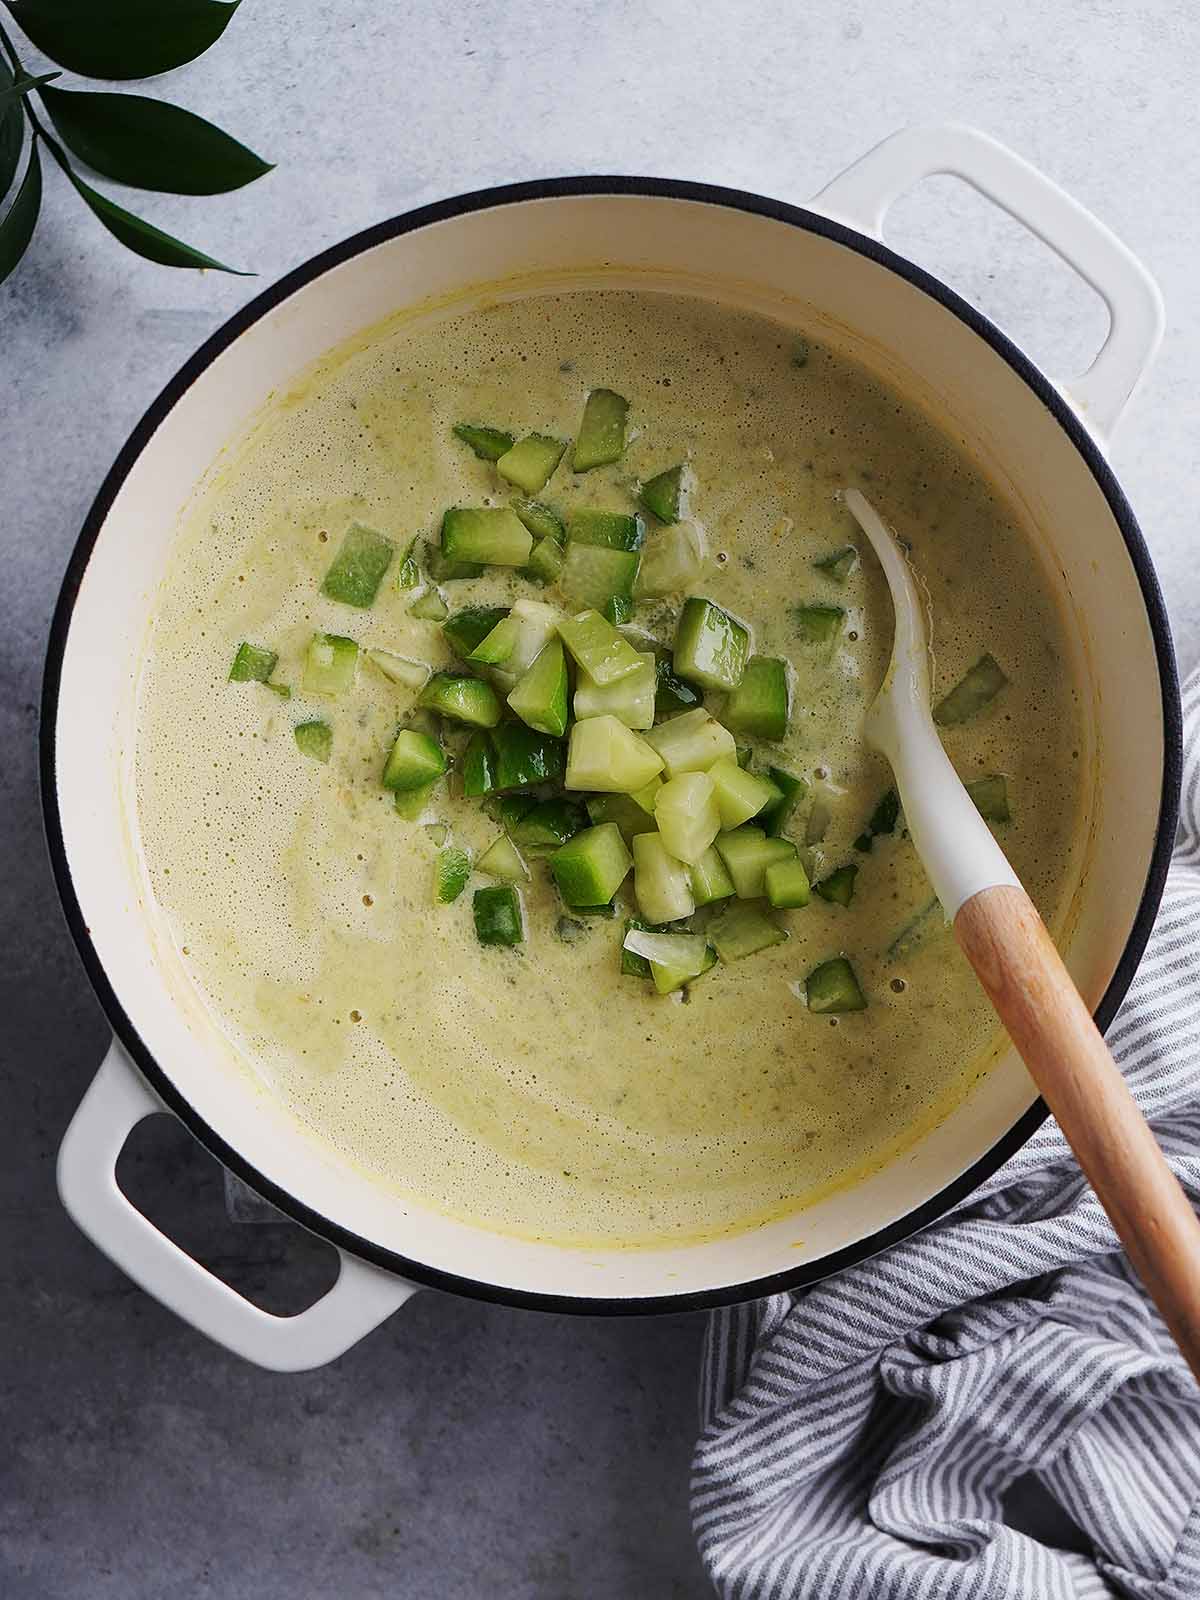 The chunks of chayote were added into the creamed vegetables in the pot.